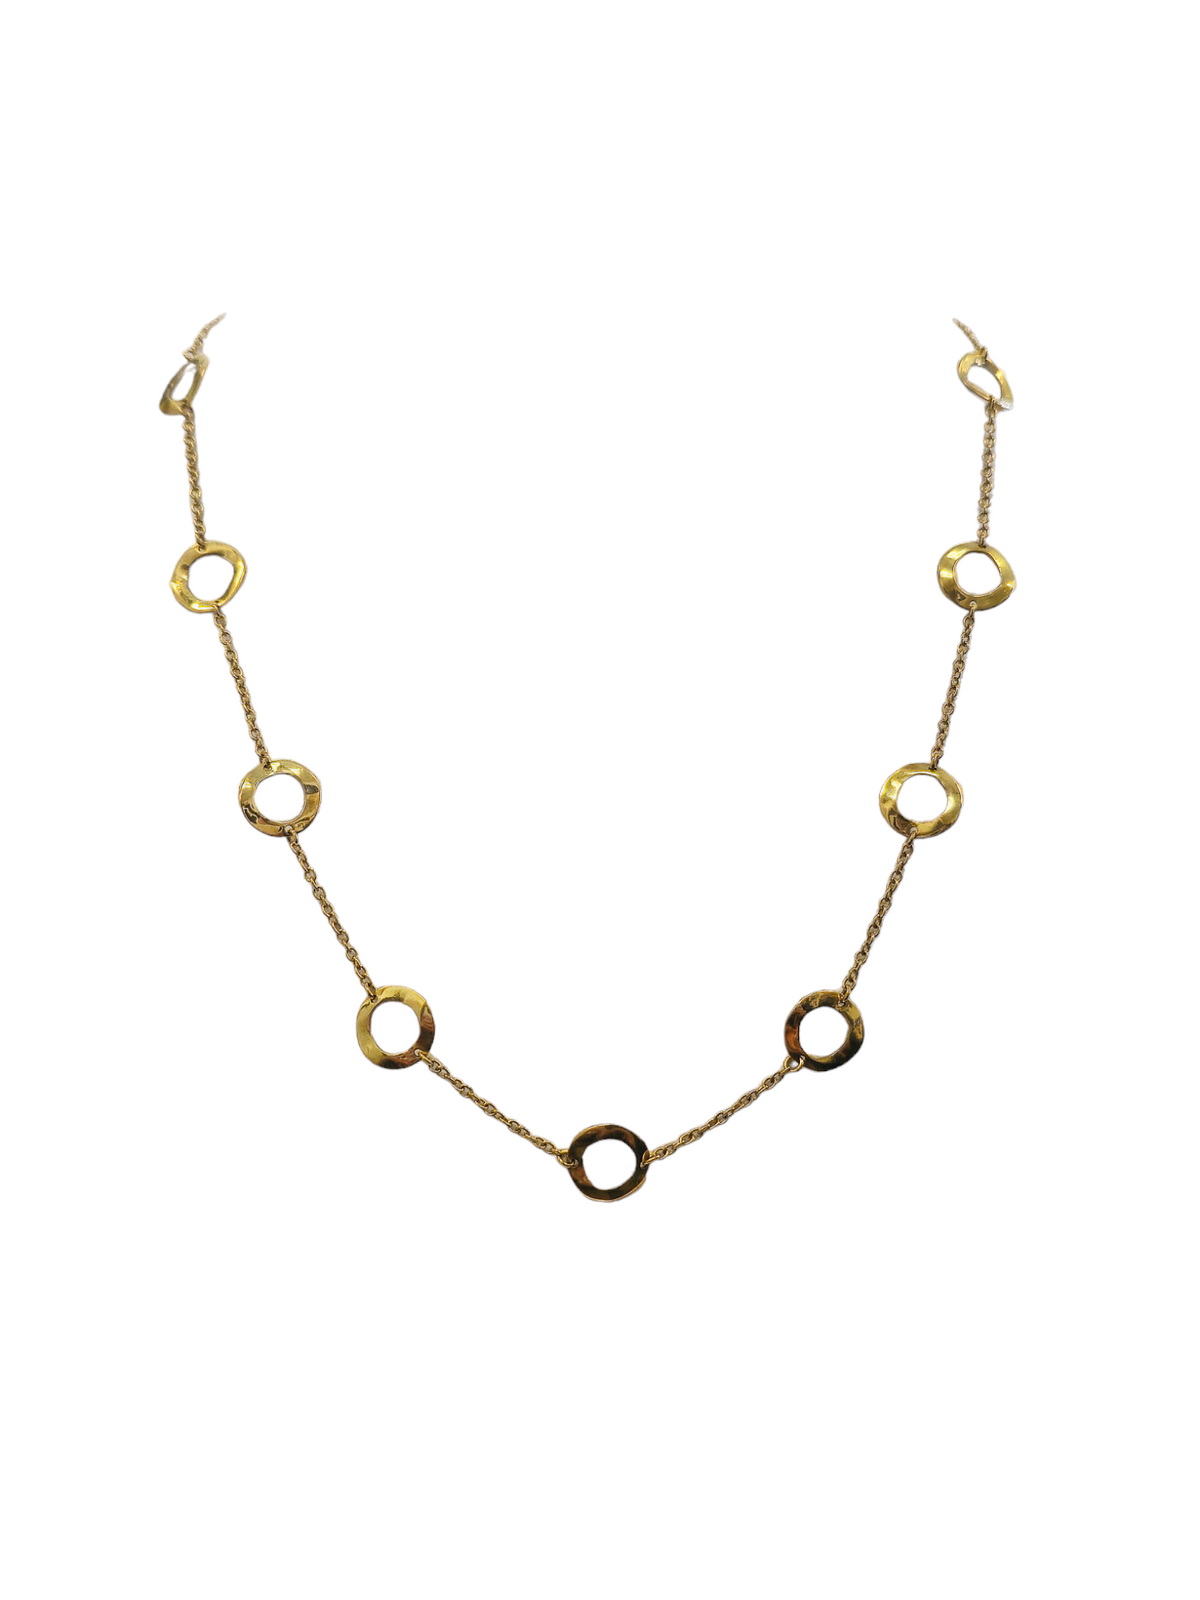 Ippolita Designer Hammered disc Necklace made in solid 18-karat yellow gold 18 inches